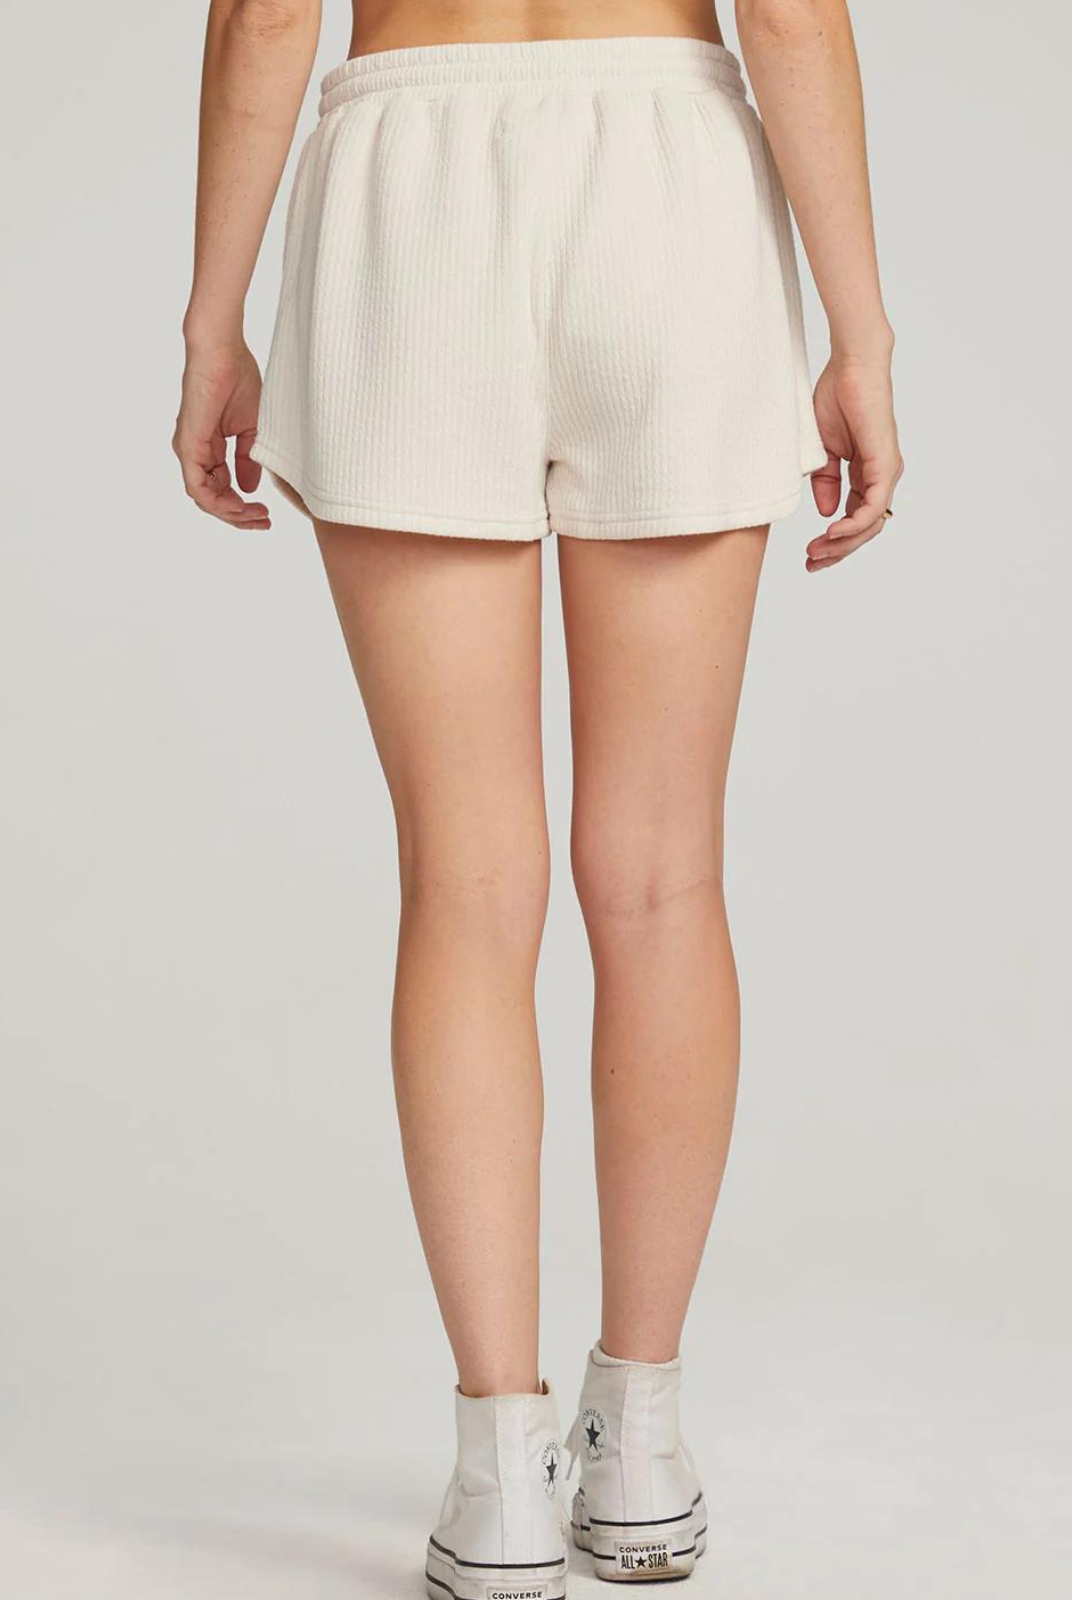 Saltwater Luxe Pull On Short - Salt. Short and sweet! Our Pull On Short in a white salt color is a versatile piece that gives a sporty stylish look.